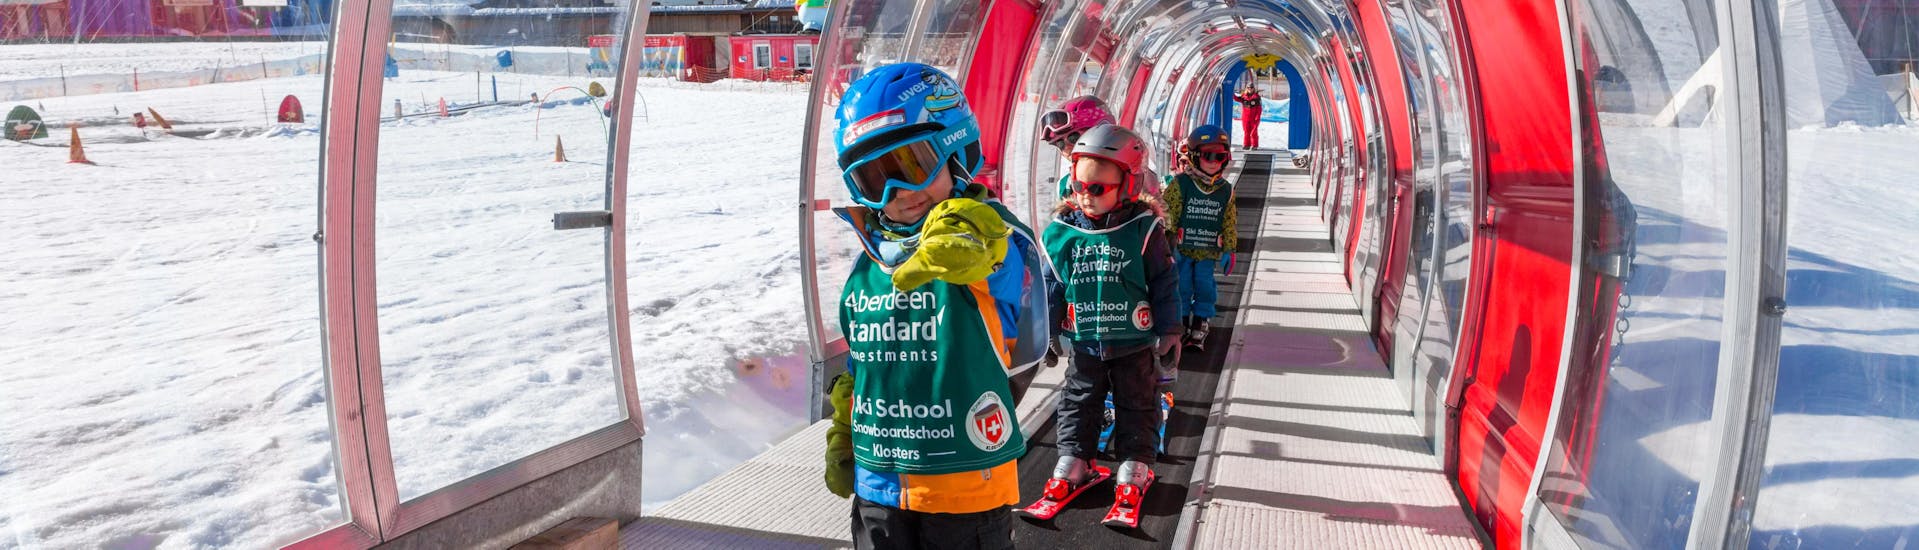 Kids Ski Lessons "Snowgarden" (up to 6 y.) for First Timers.